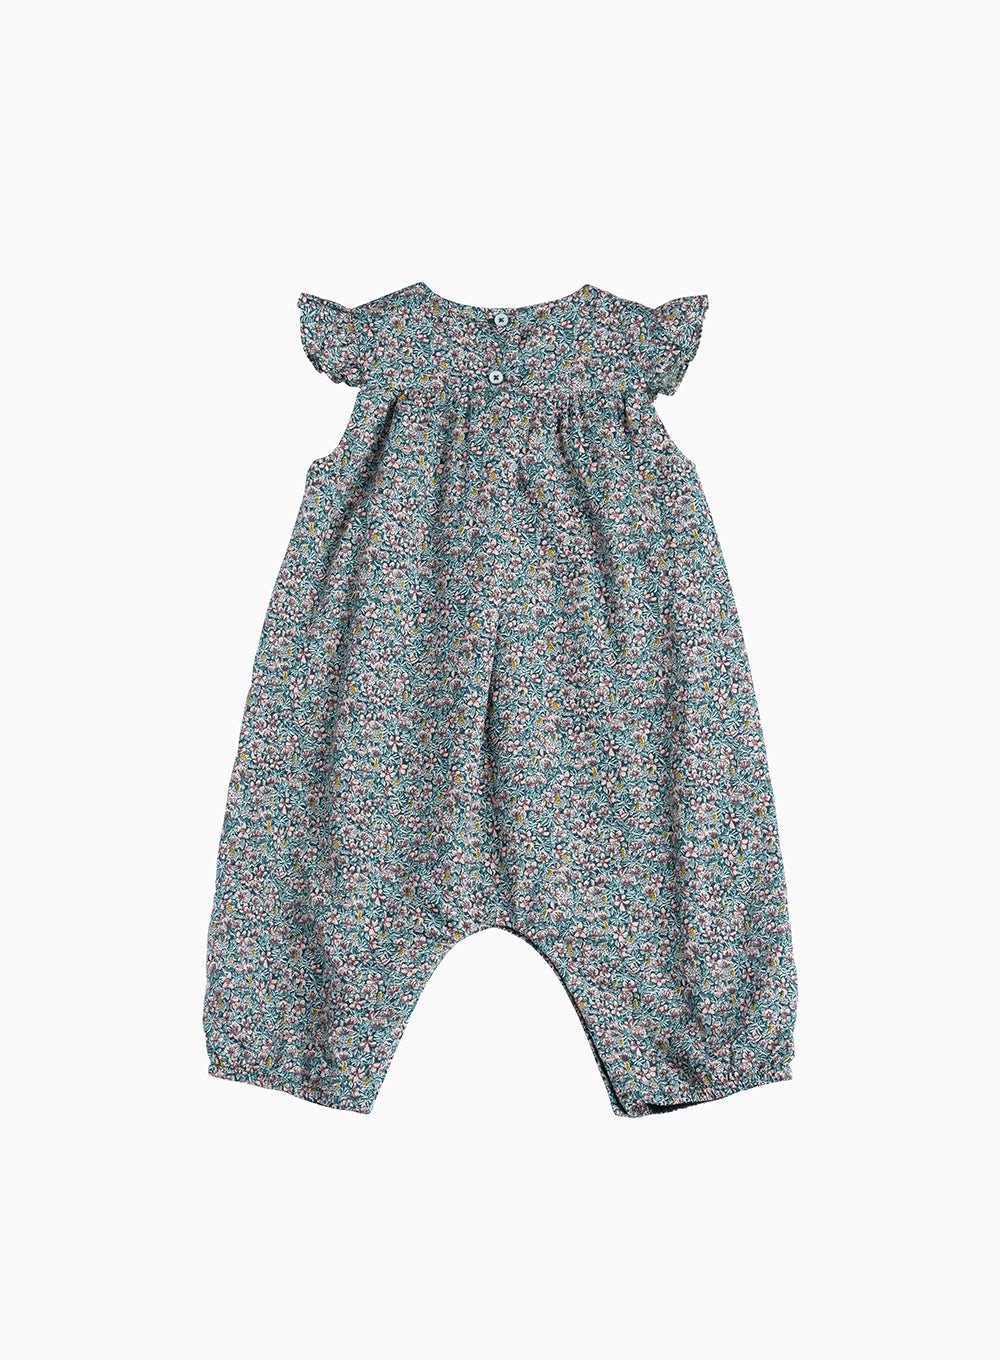 Lily Rose Romper Little Frill Sleeved Romper in Ragged Robin